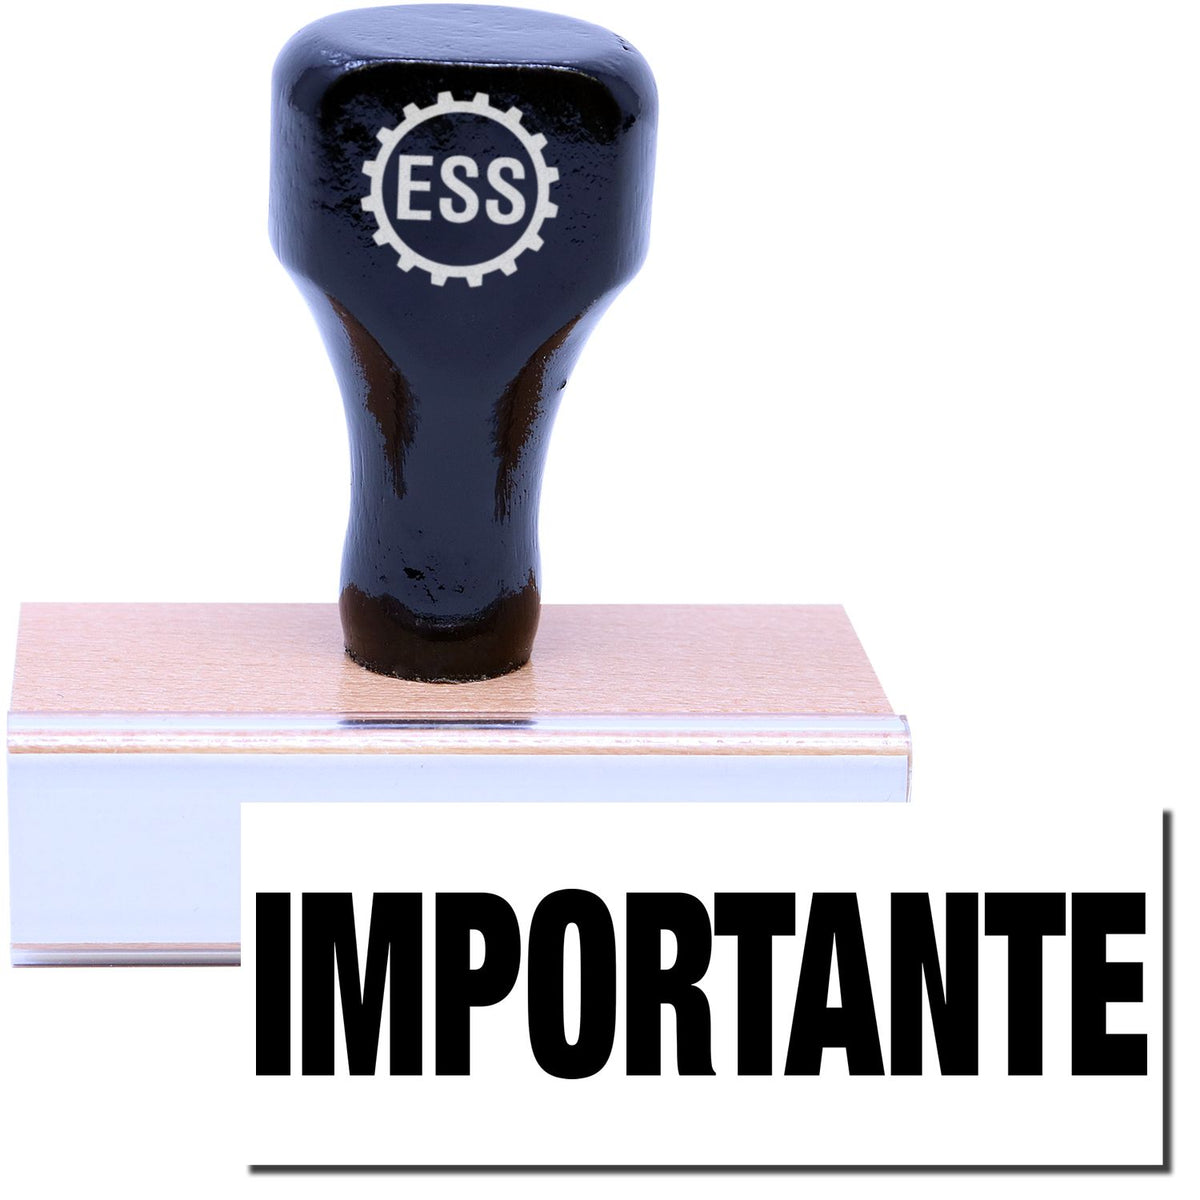 A stock office rubber stamp with a stamped image showing how the text &quot;IMPORTANTE&quot; in a large font is displayed after stamping.